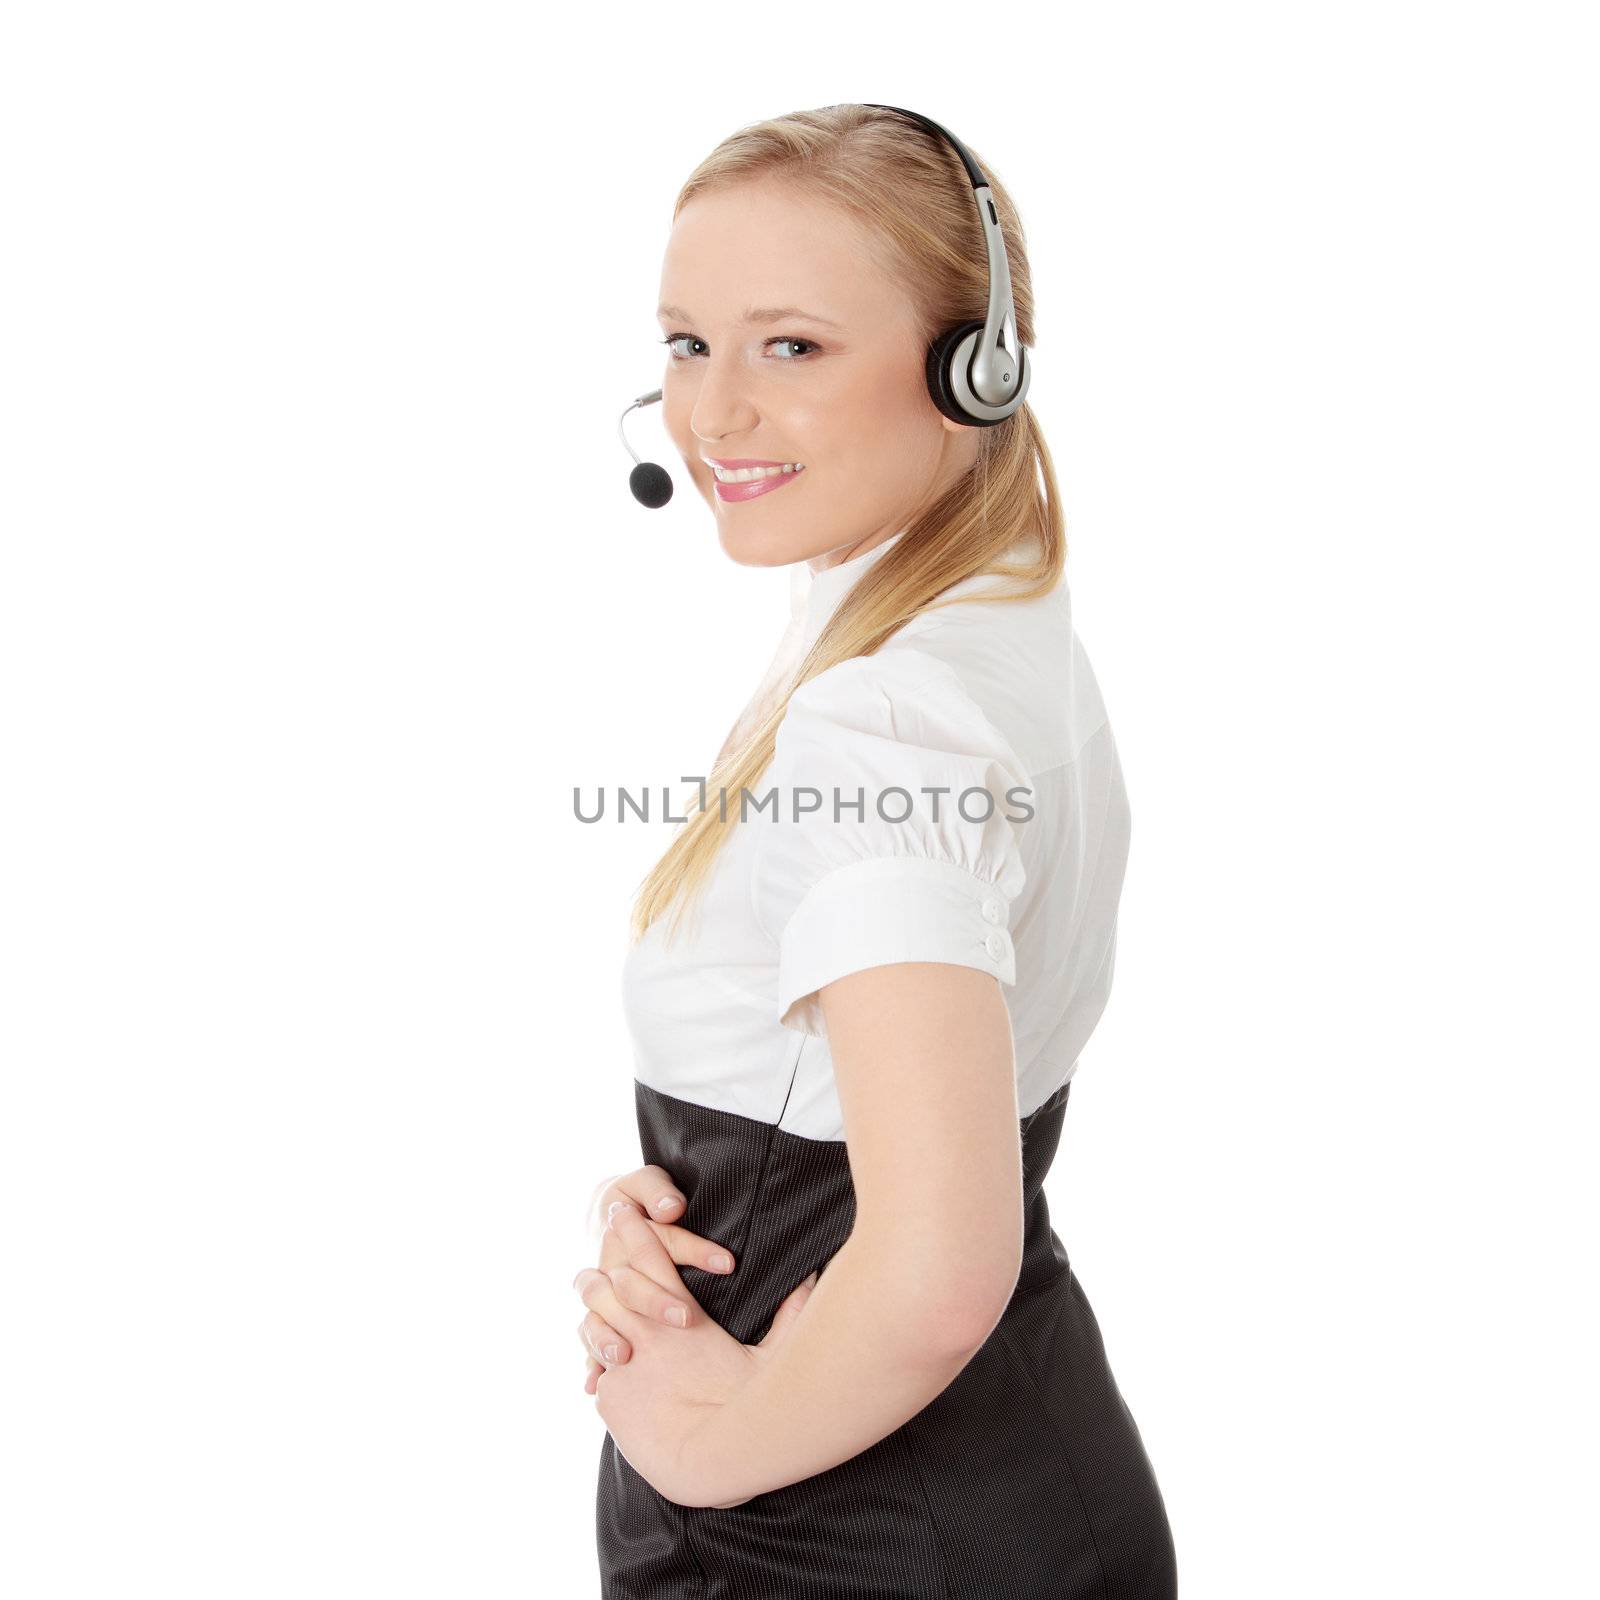 Call center woman with headset. Isolated on white